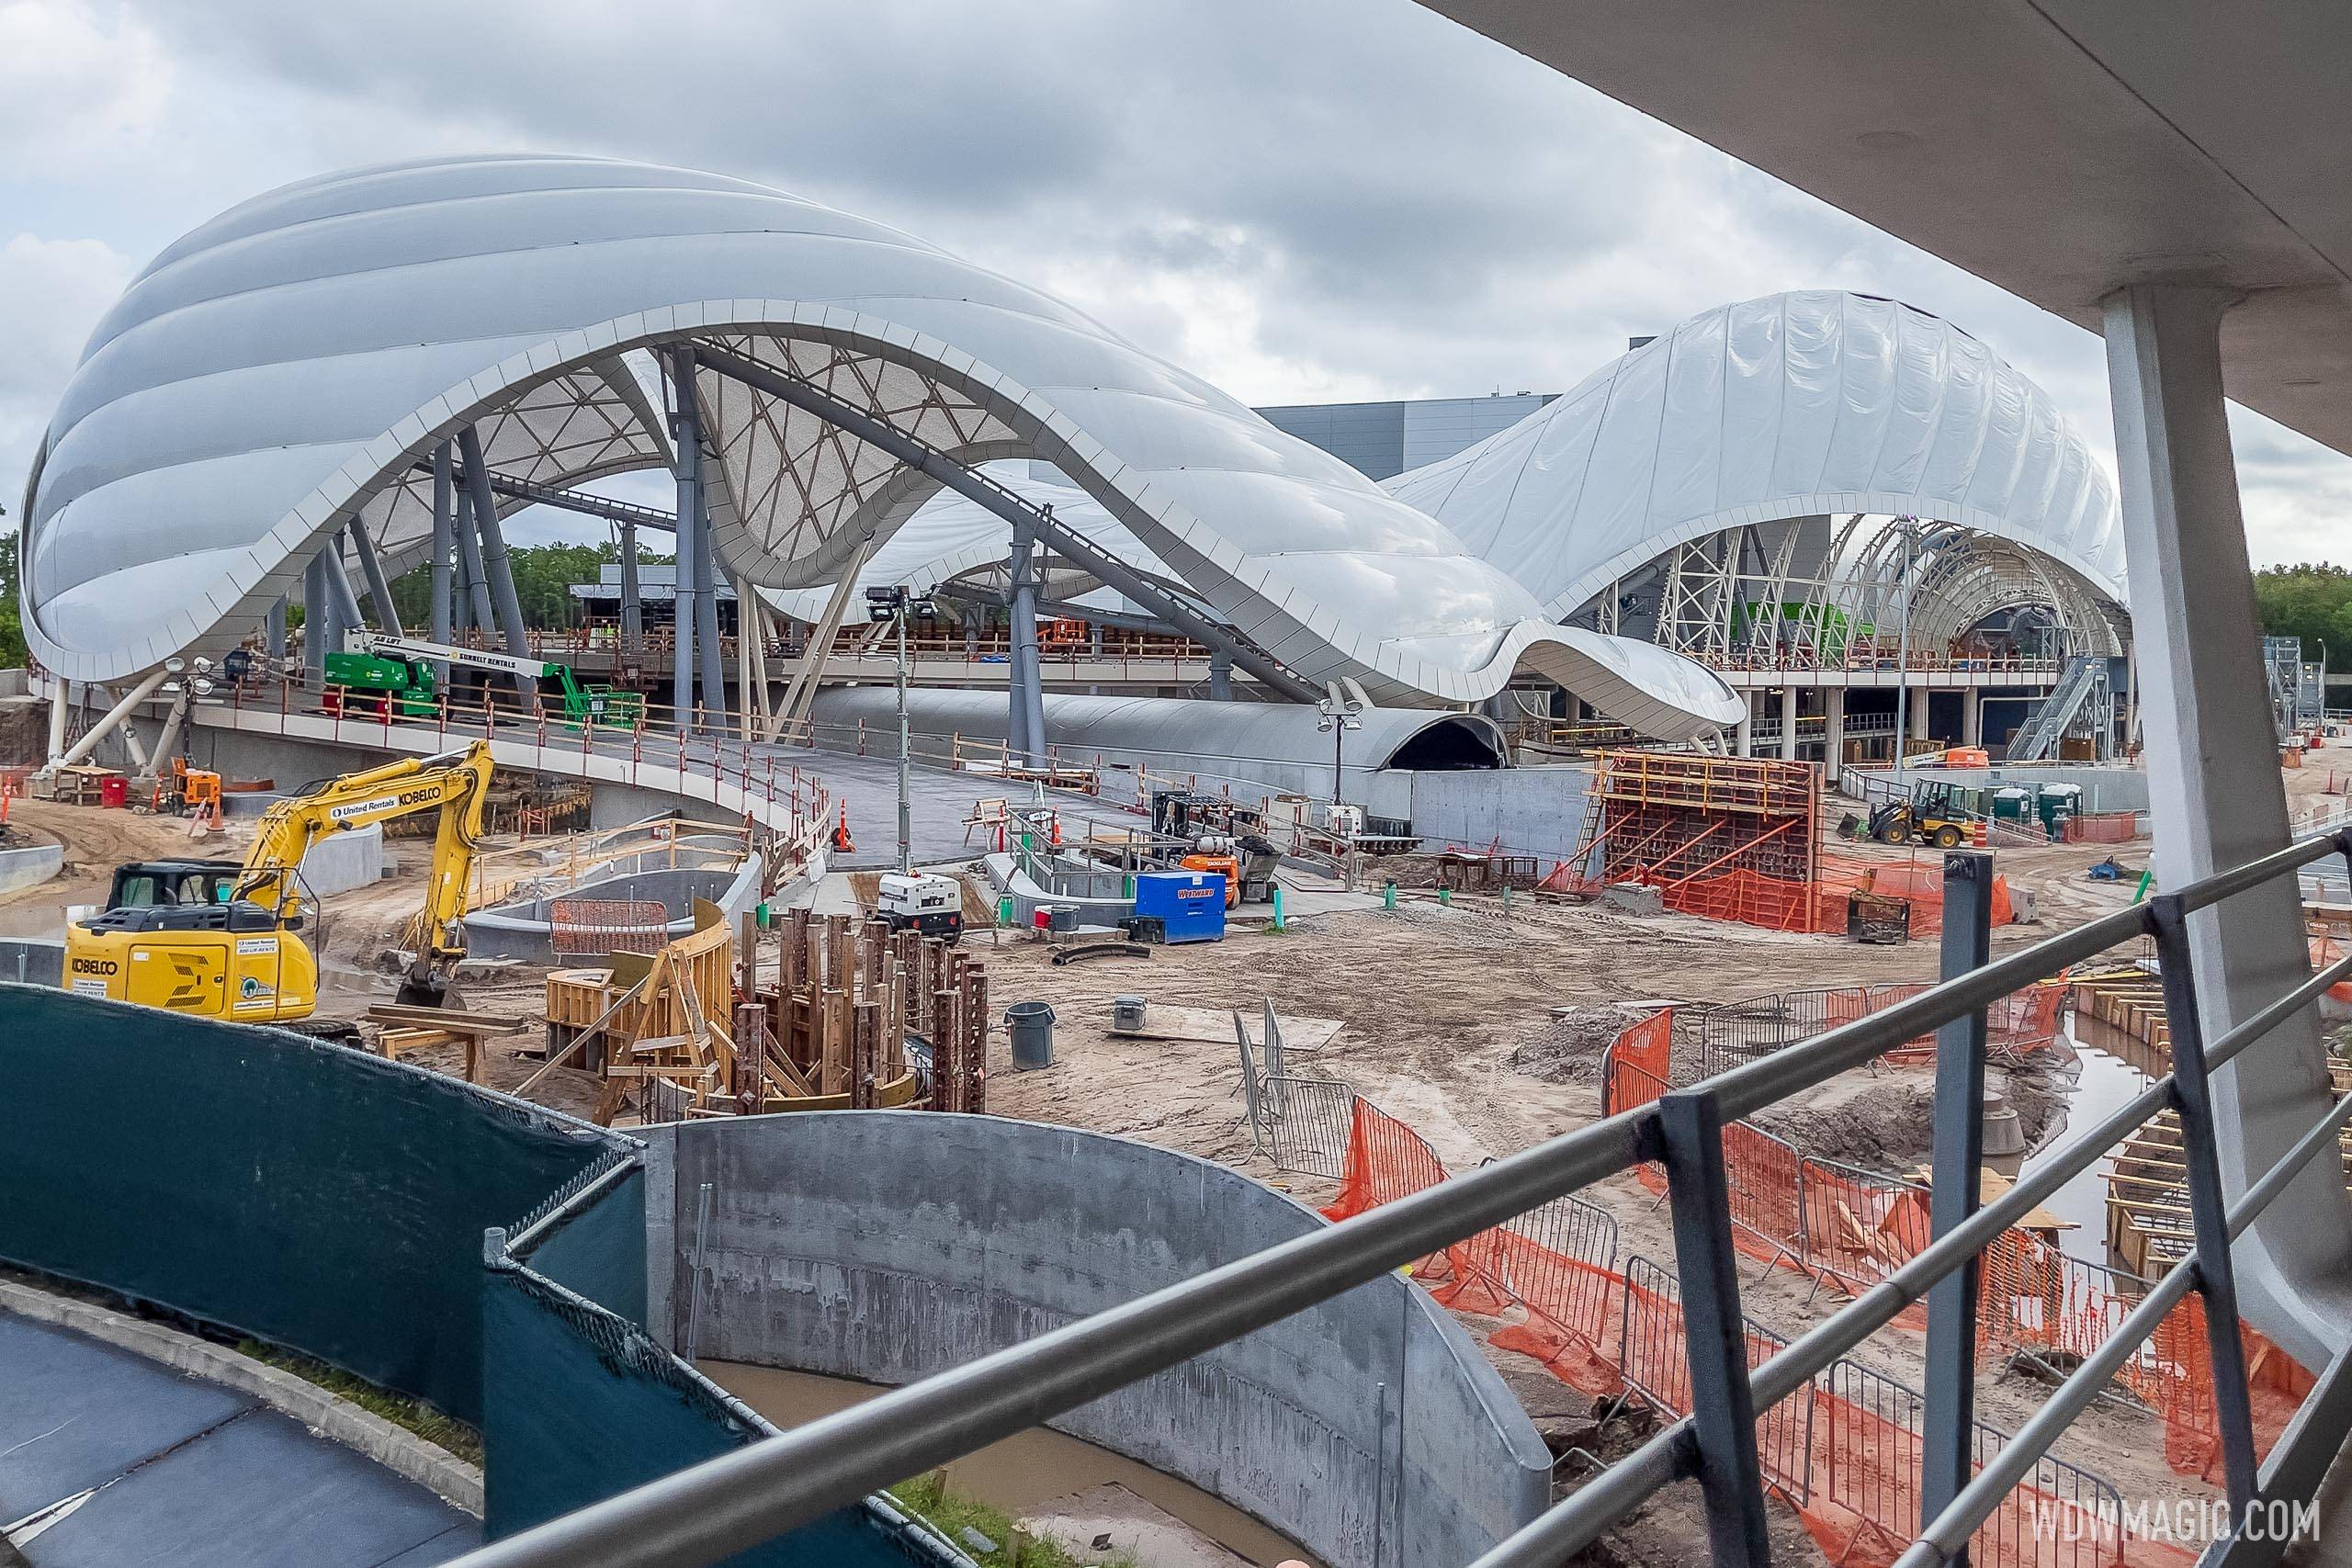 Latest look at TRON Lightcycle Run construction from Magic Kingdom